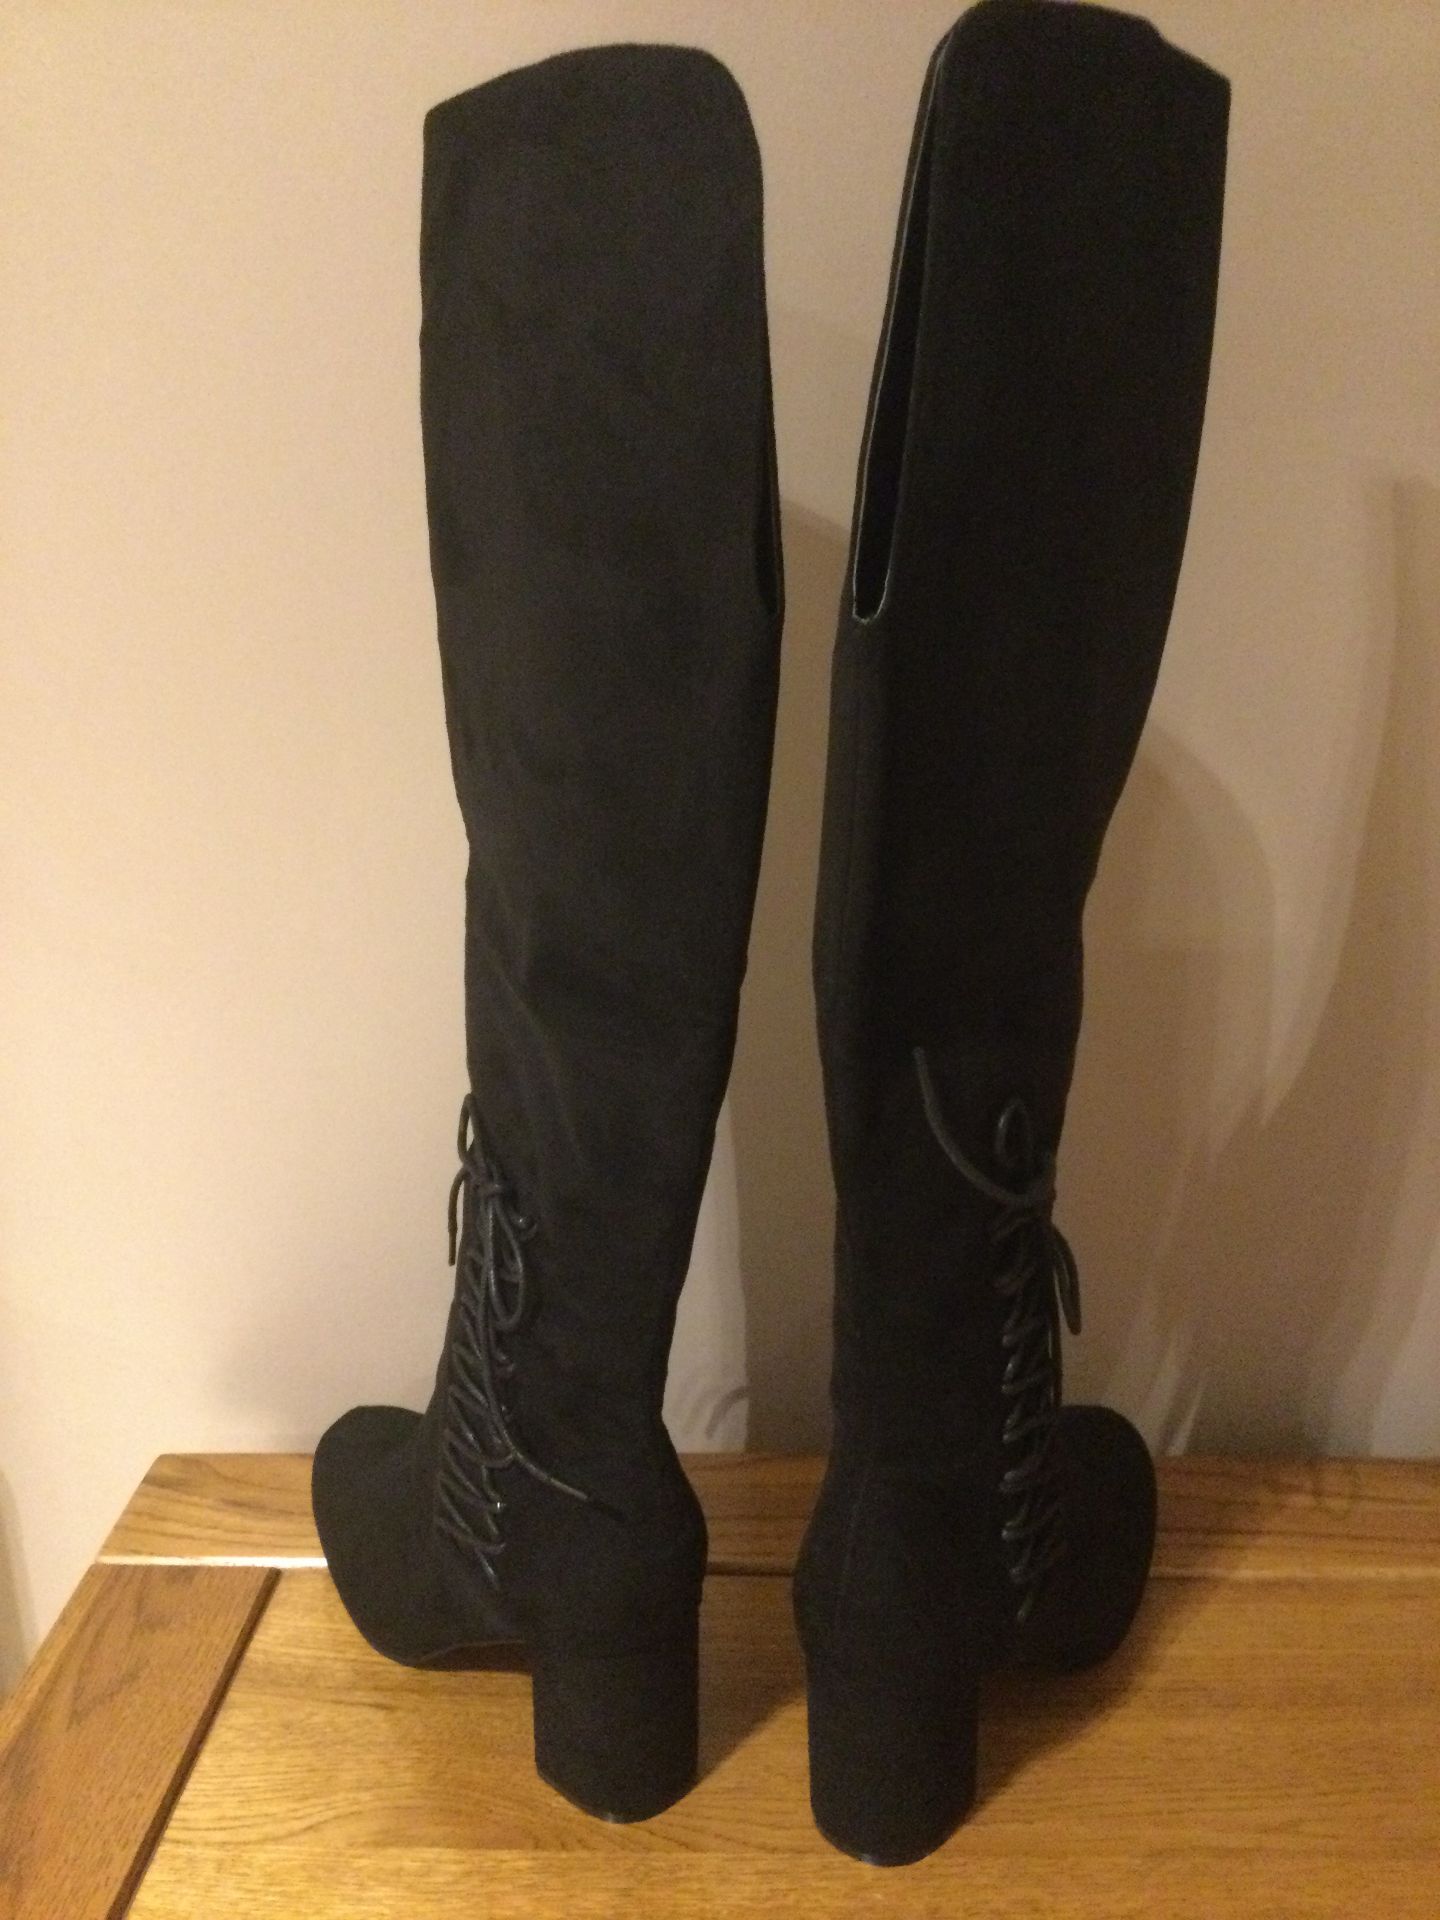 Dolcis “Emma” Long Boots, Block Heel, Size 4, Black - New RRP £55.00 - Image 4 of 7